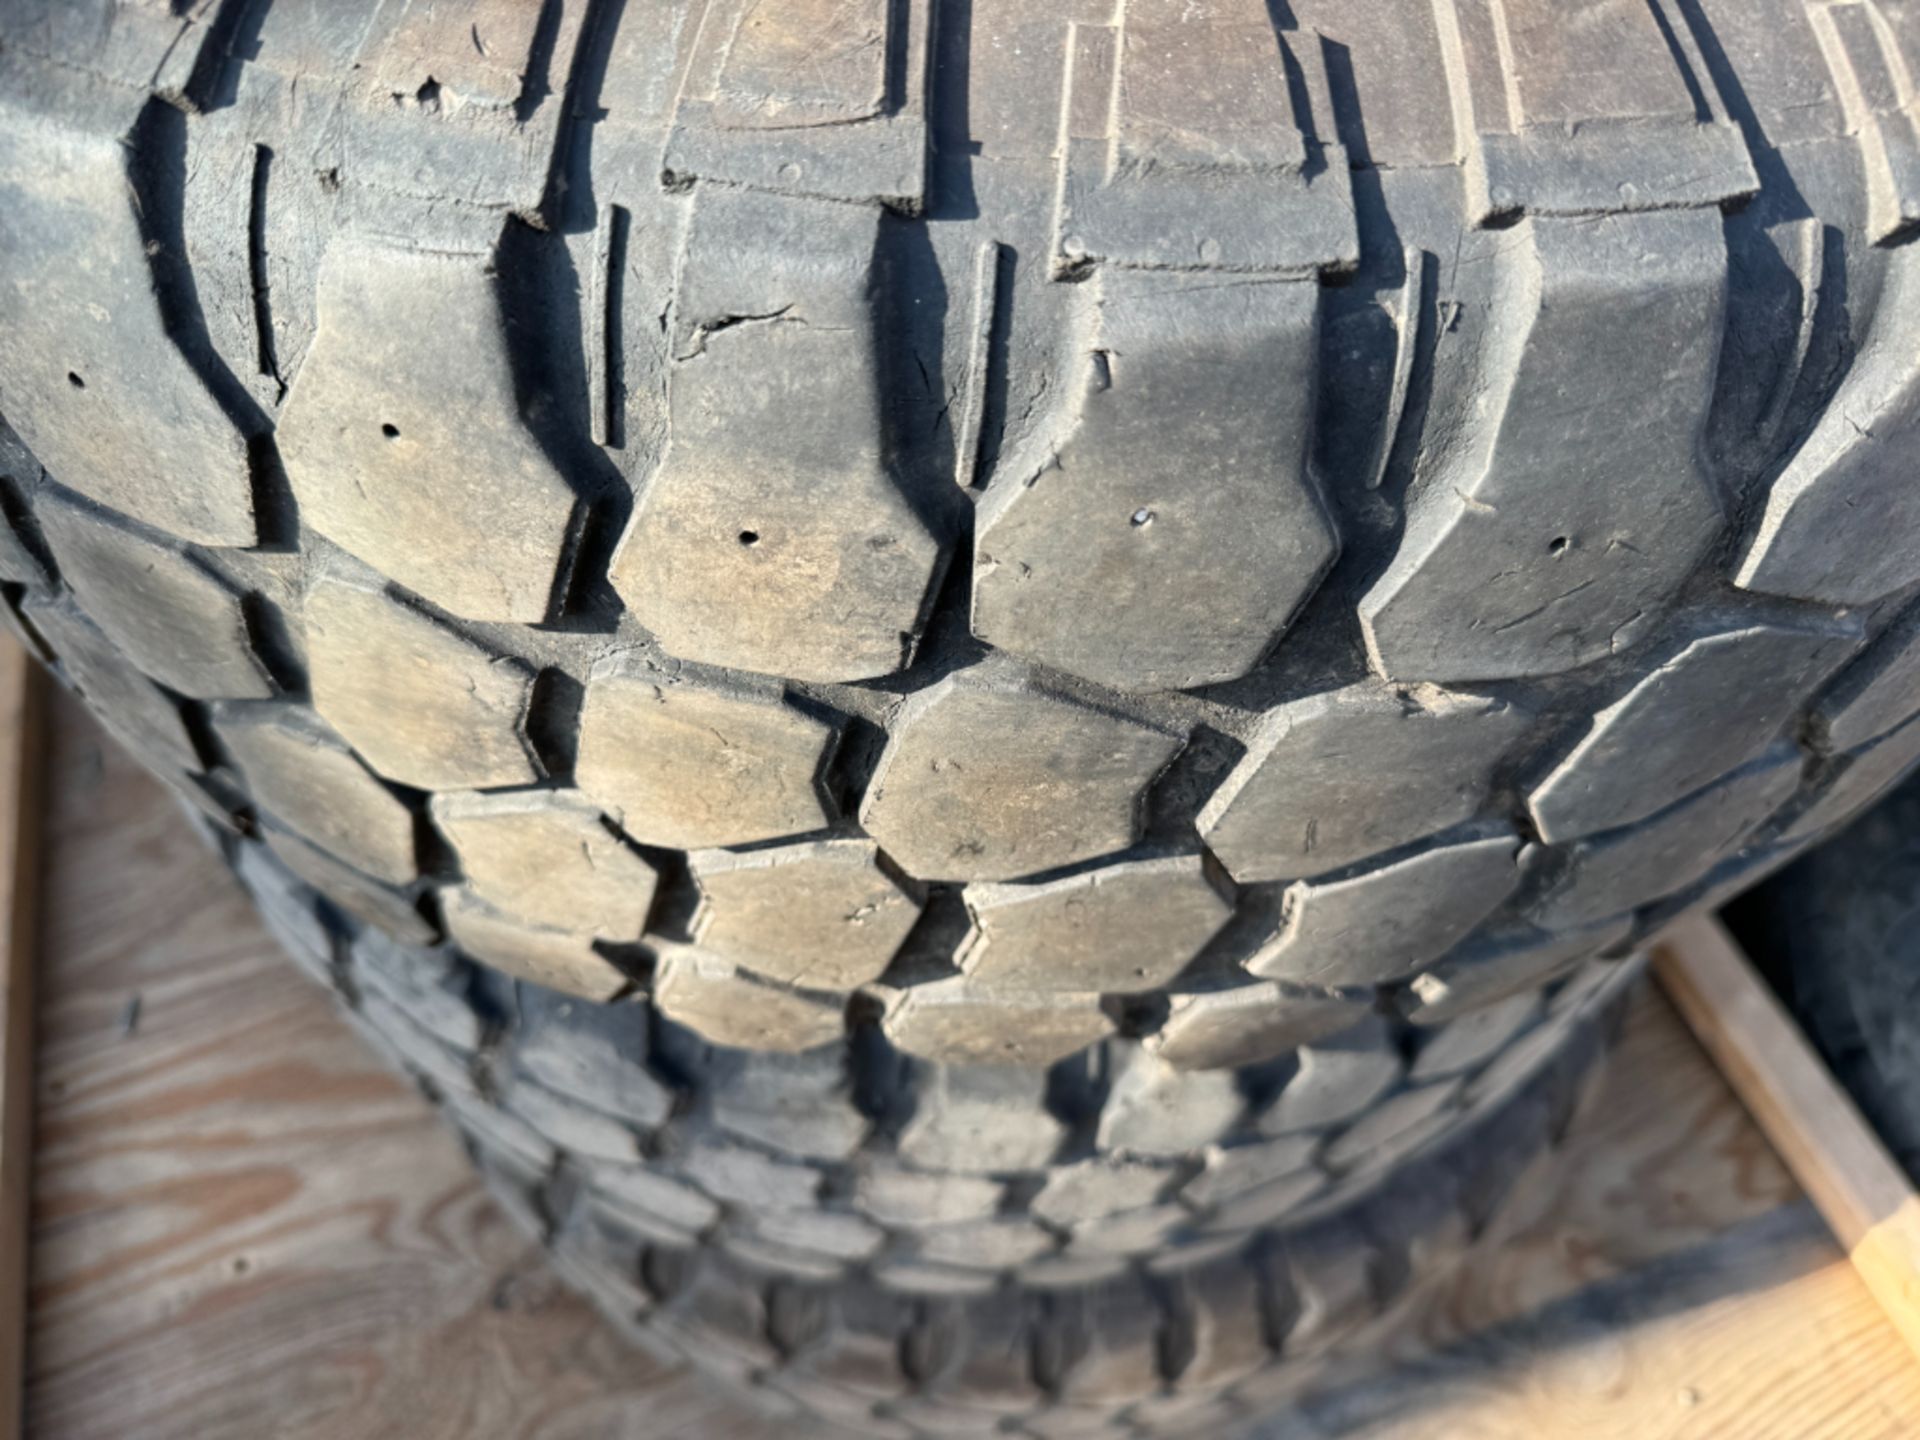 3 All Country MT Ironman LT285/70R17 Tires - Image 3 of 4